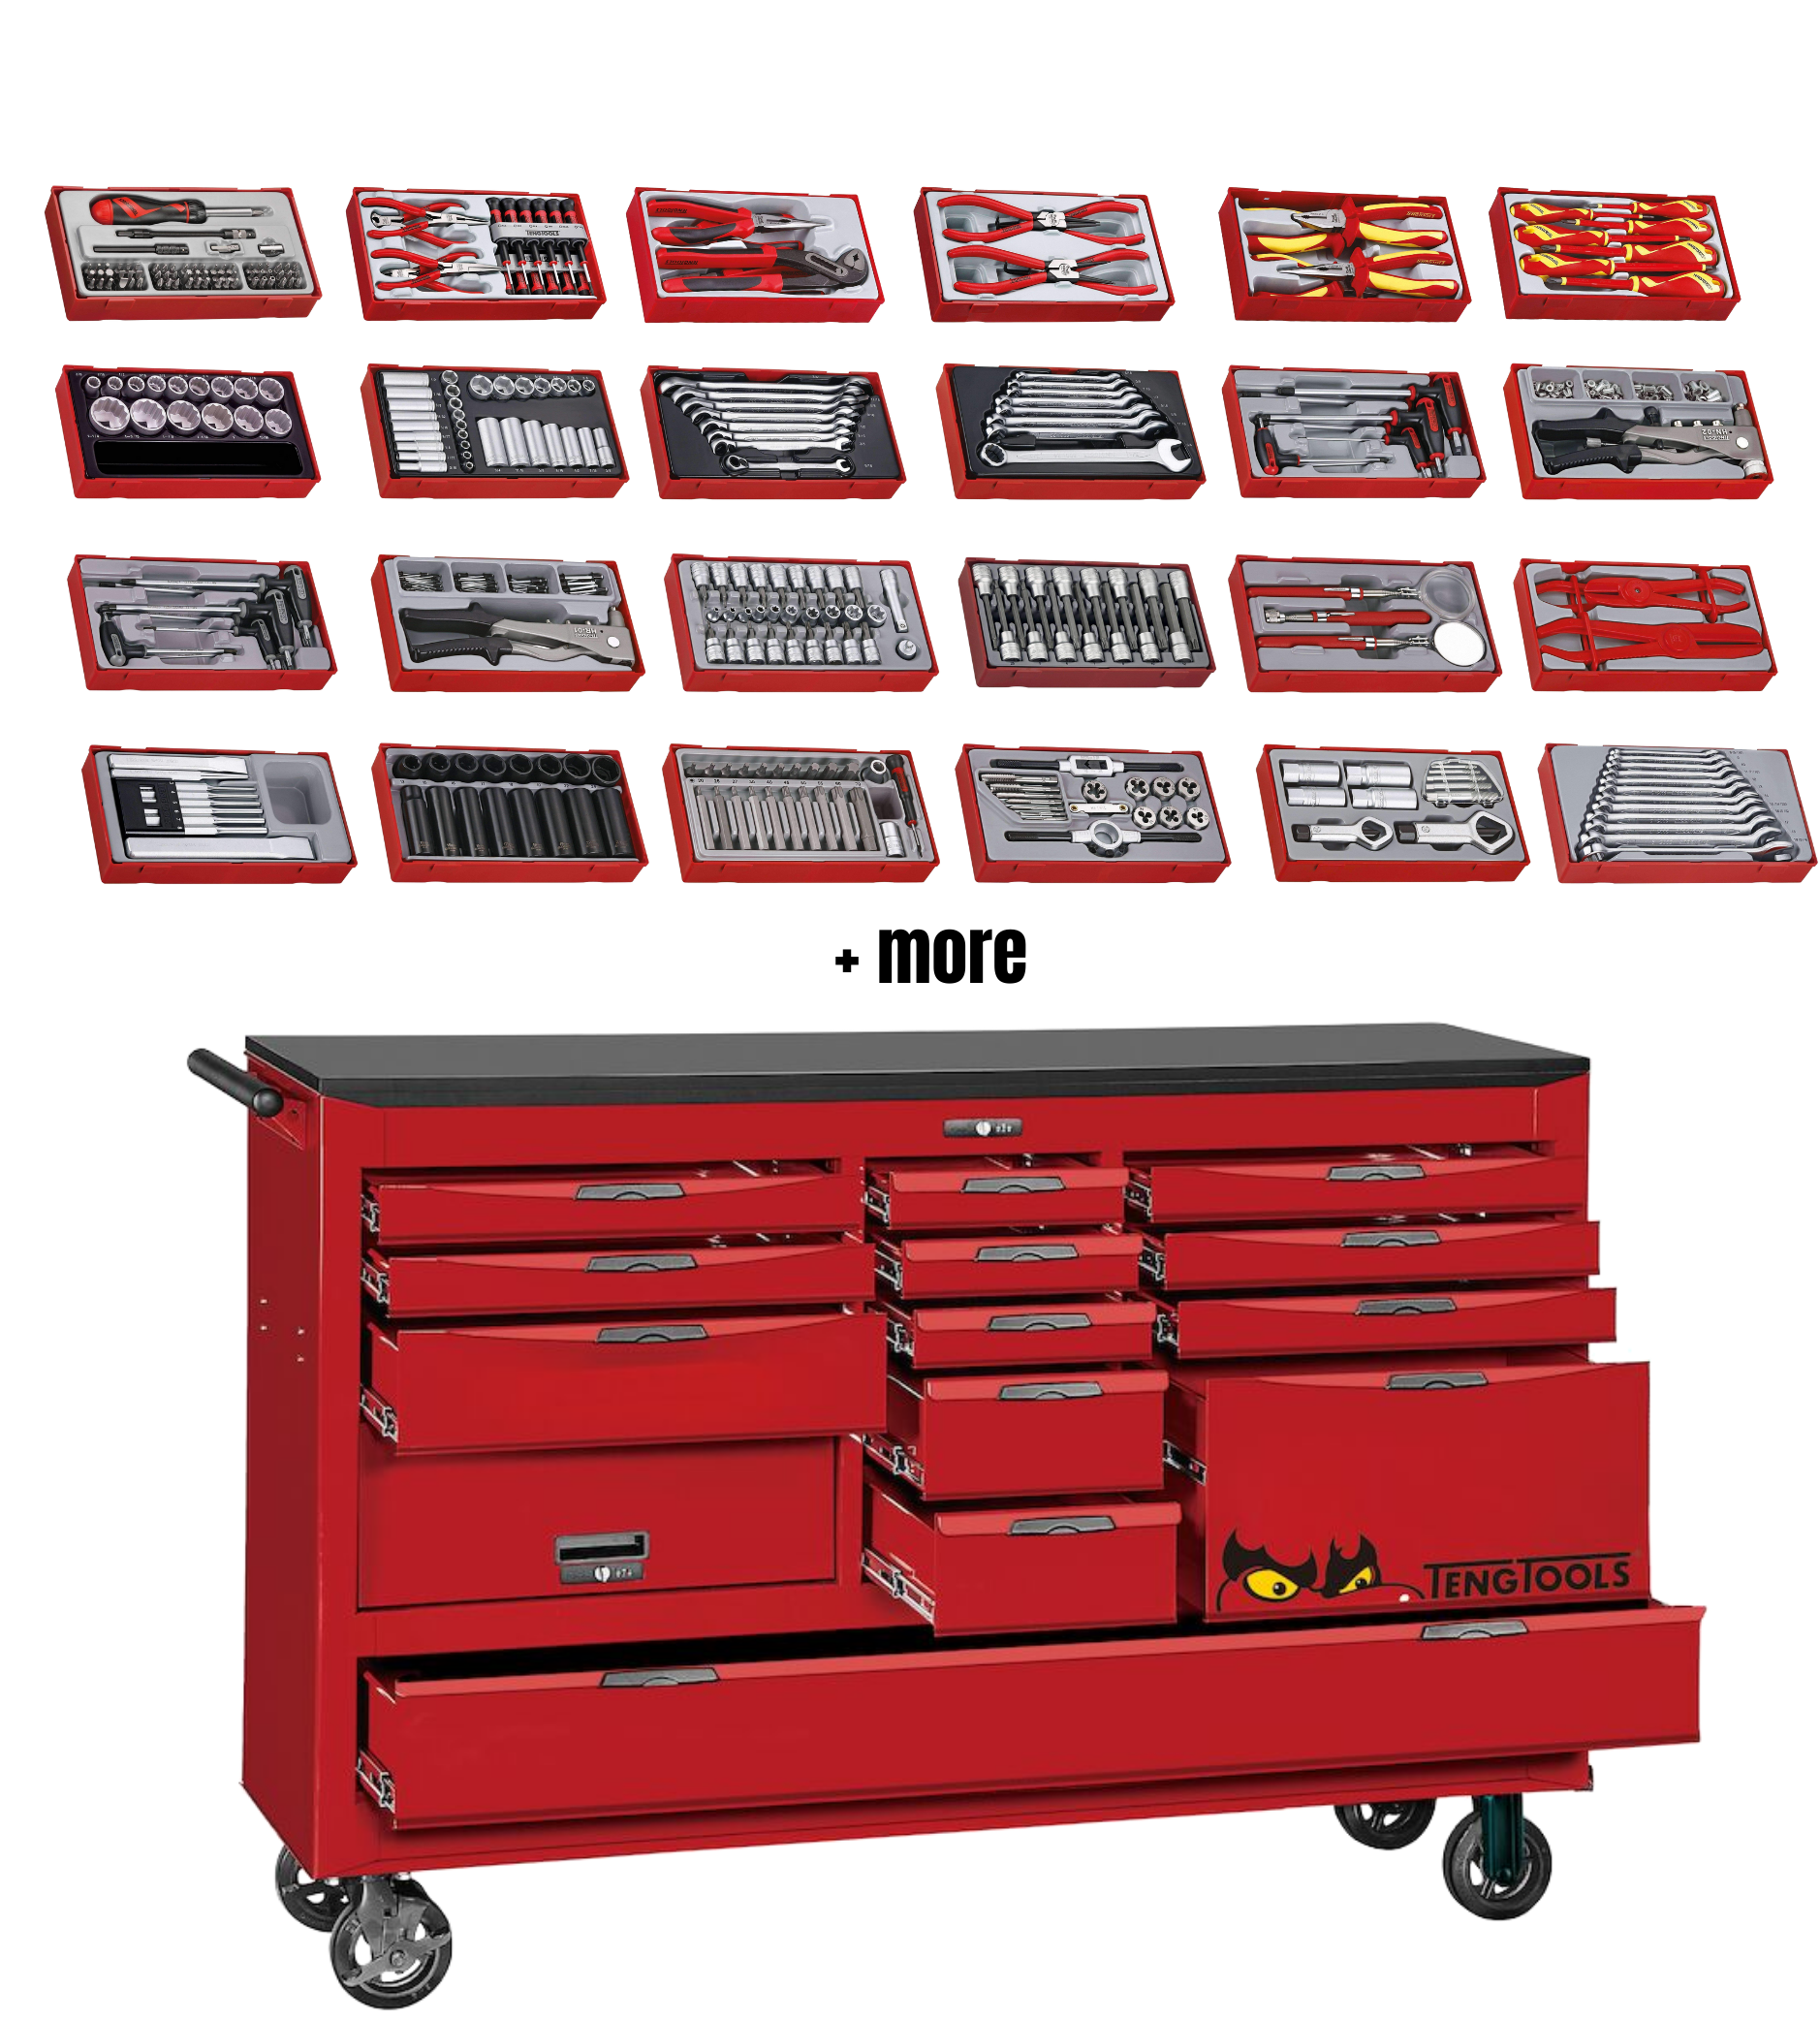 COFFRET A OUTILS US CARRE 3/8 US TENG TOOLS OUTILS MONTAGE HARLEY PRIX  REDUIT 